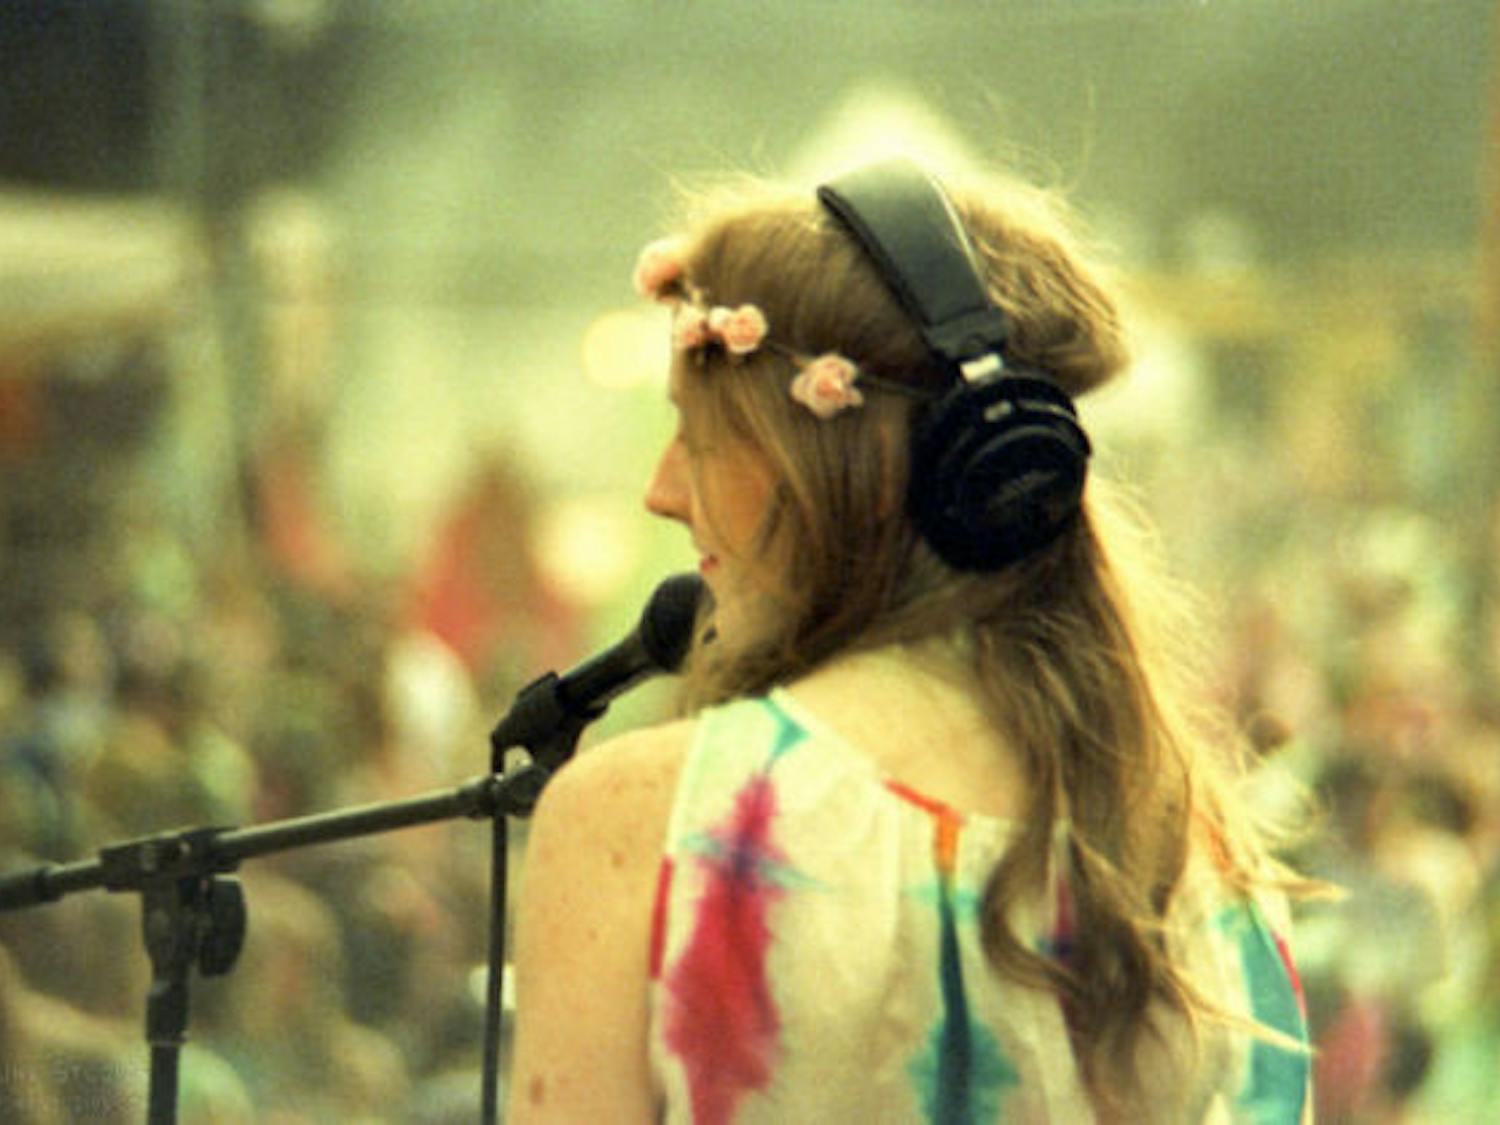 "Woodstock 1969?" by Satish Indofunk, used under CC BY-NC-ND 2.0